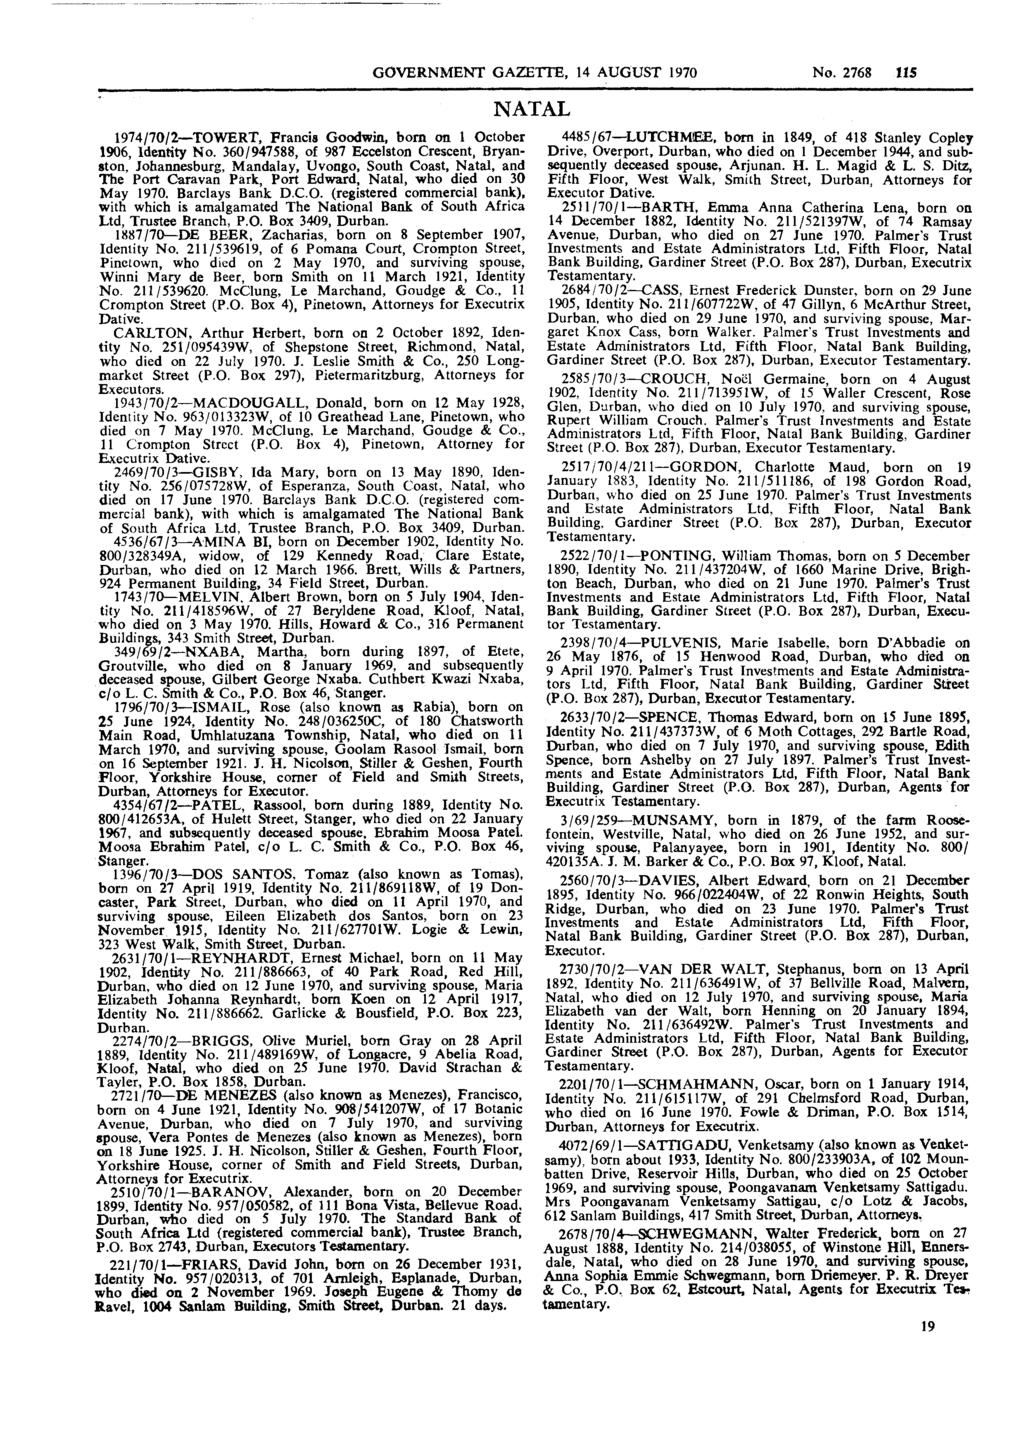 1974/70/2-TOWERT, GOVERNMENT GAZE'ITE, 14 AUGUST 1970 No. 2768 115 Francis Goodwin, born on 1 October NATAL 1906, Identity No.